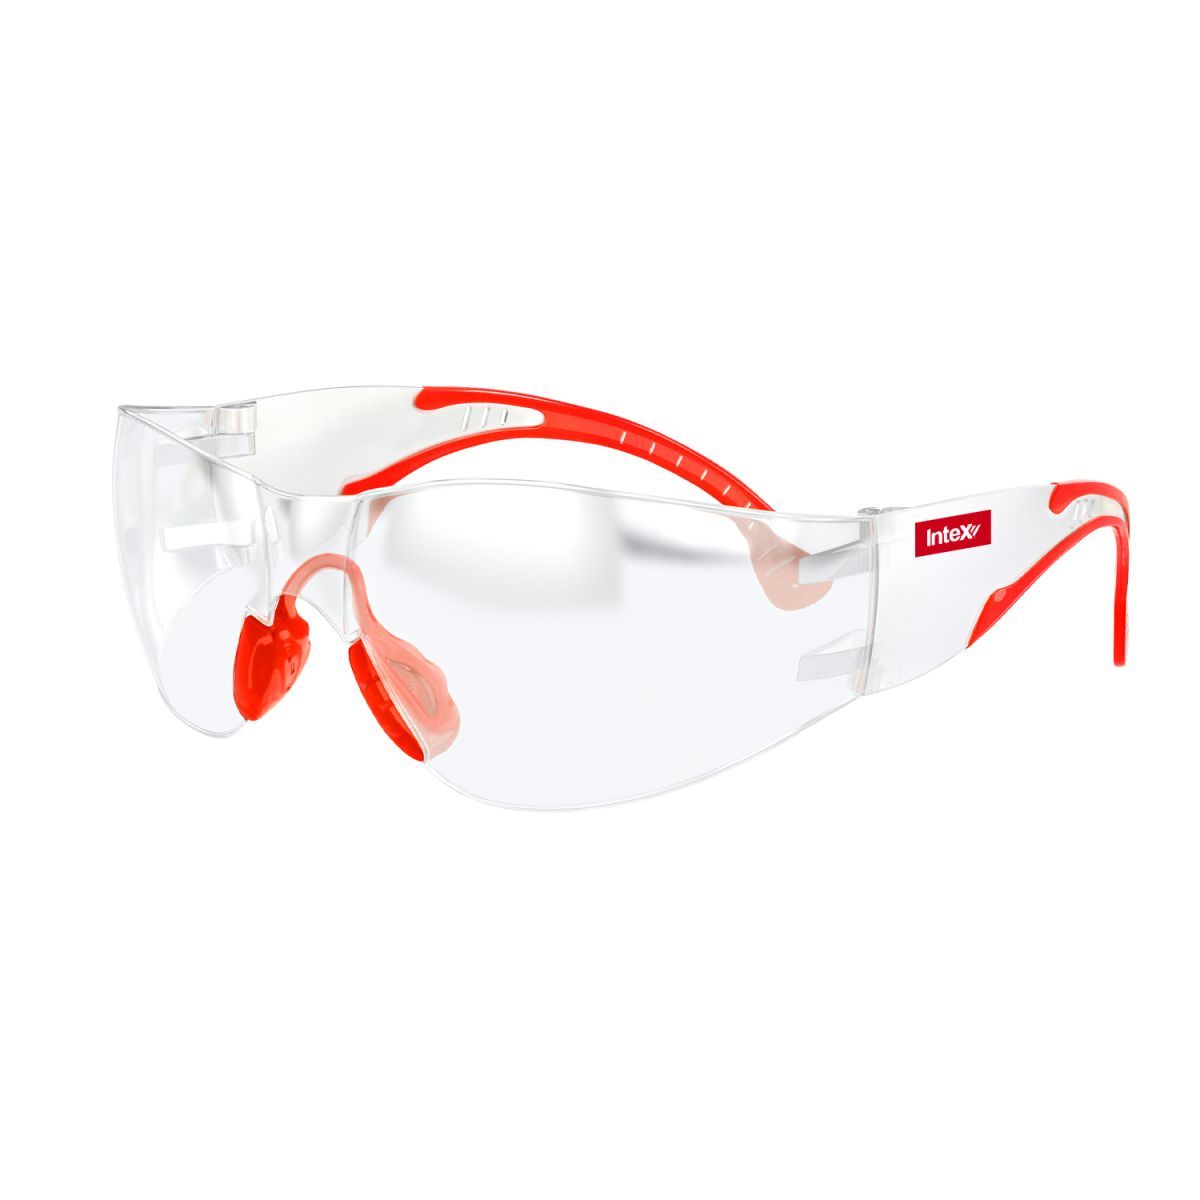 Intex ProtecX Clear Vision Safety Glasses